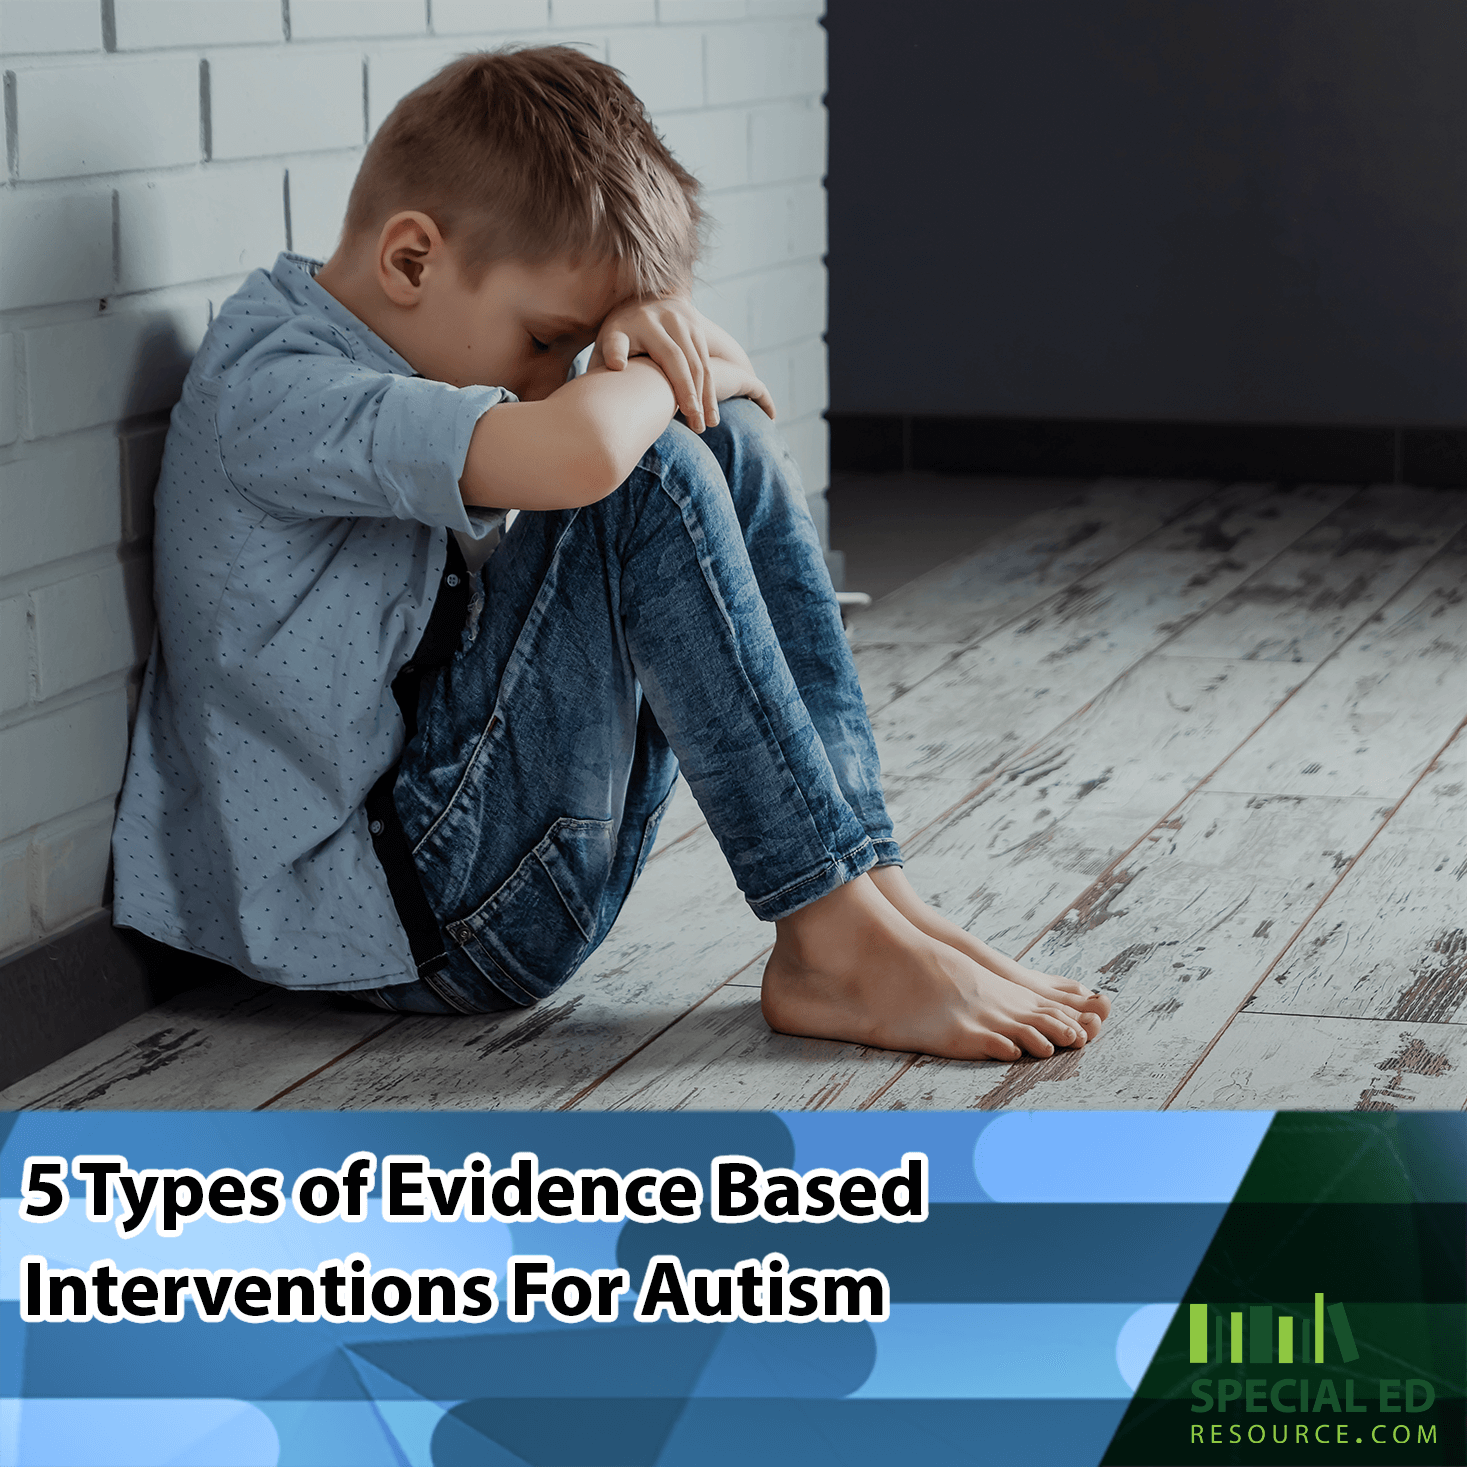 Young boy with autism looking frustrated on the floor, highlighting the importance of Evidence Based Interventions For Autism.